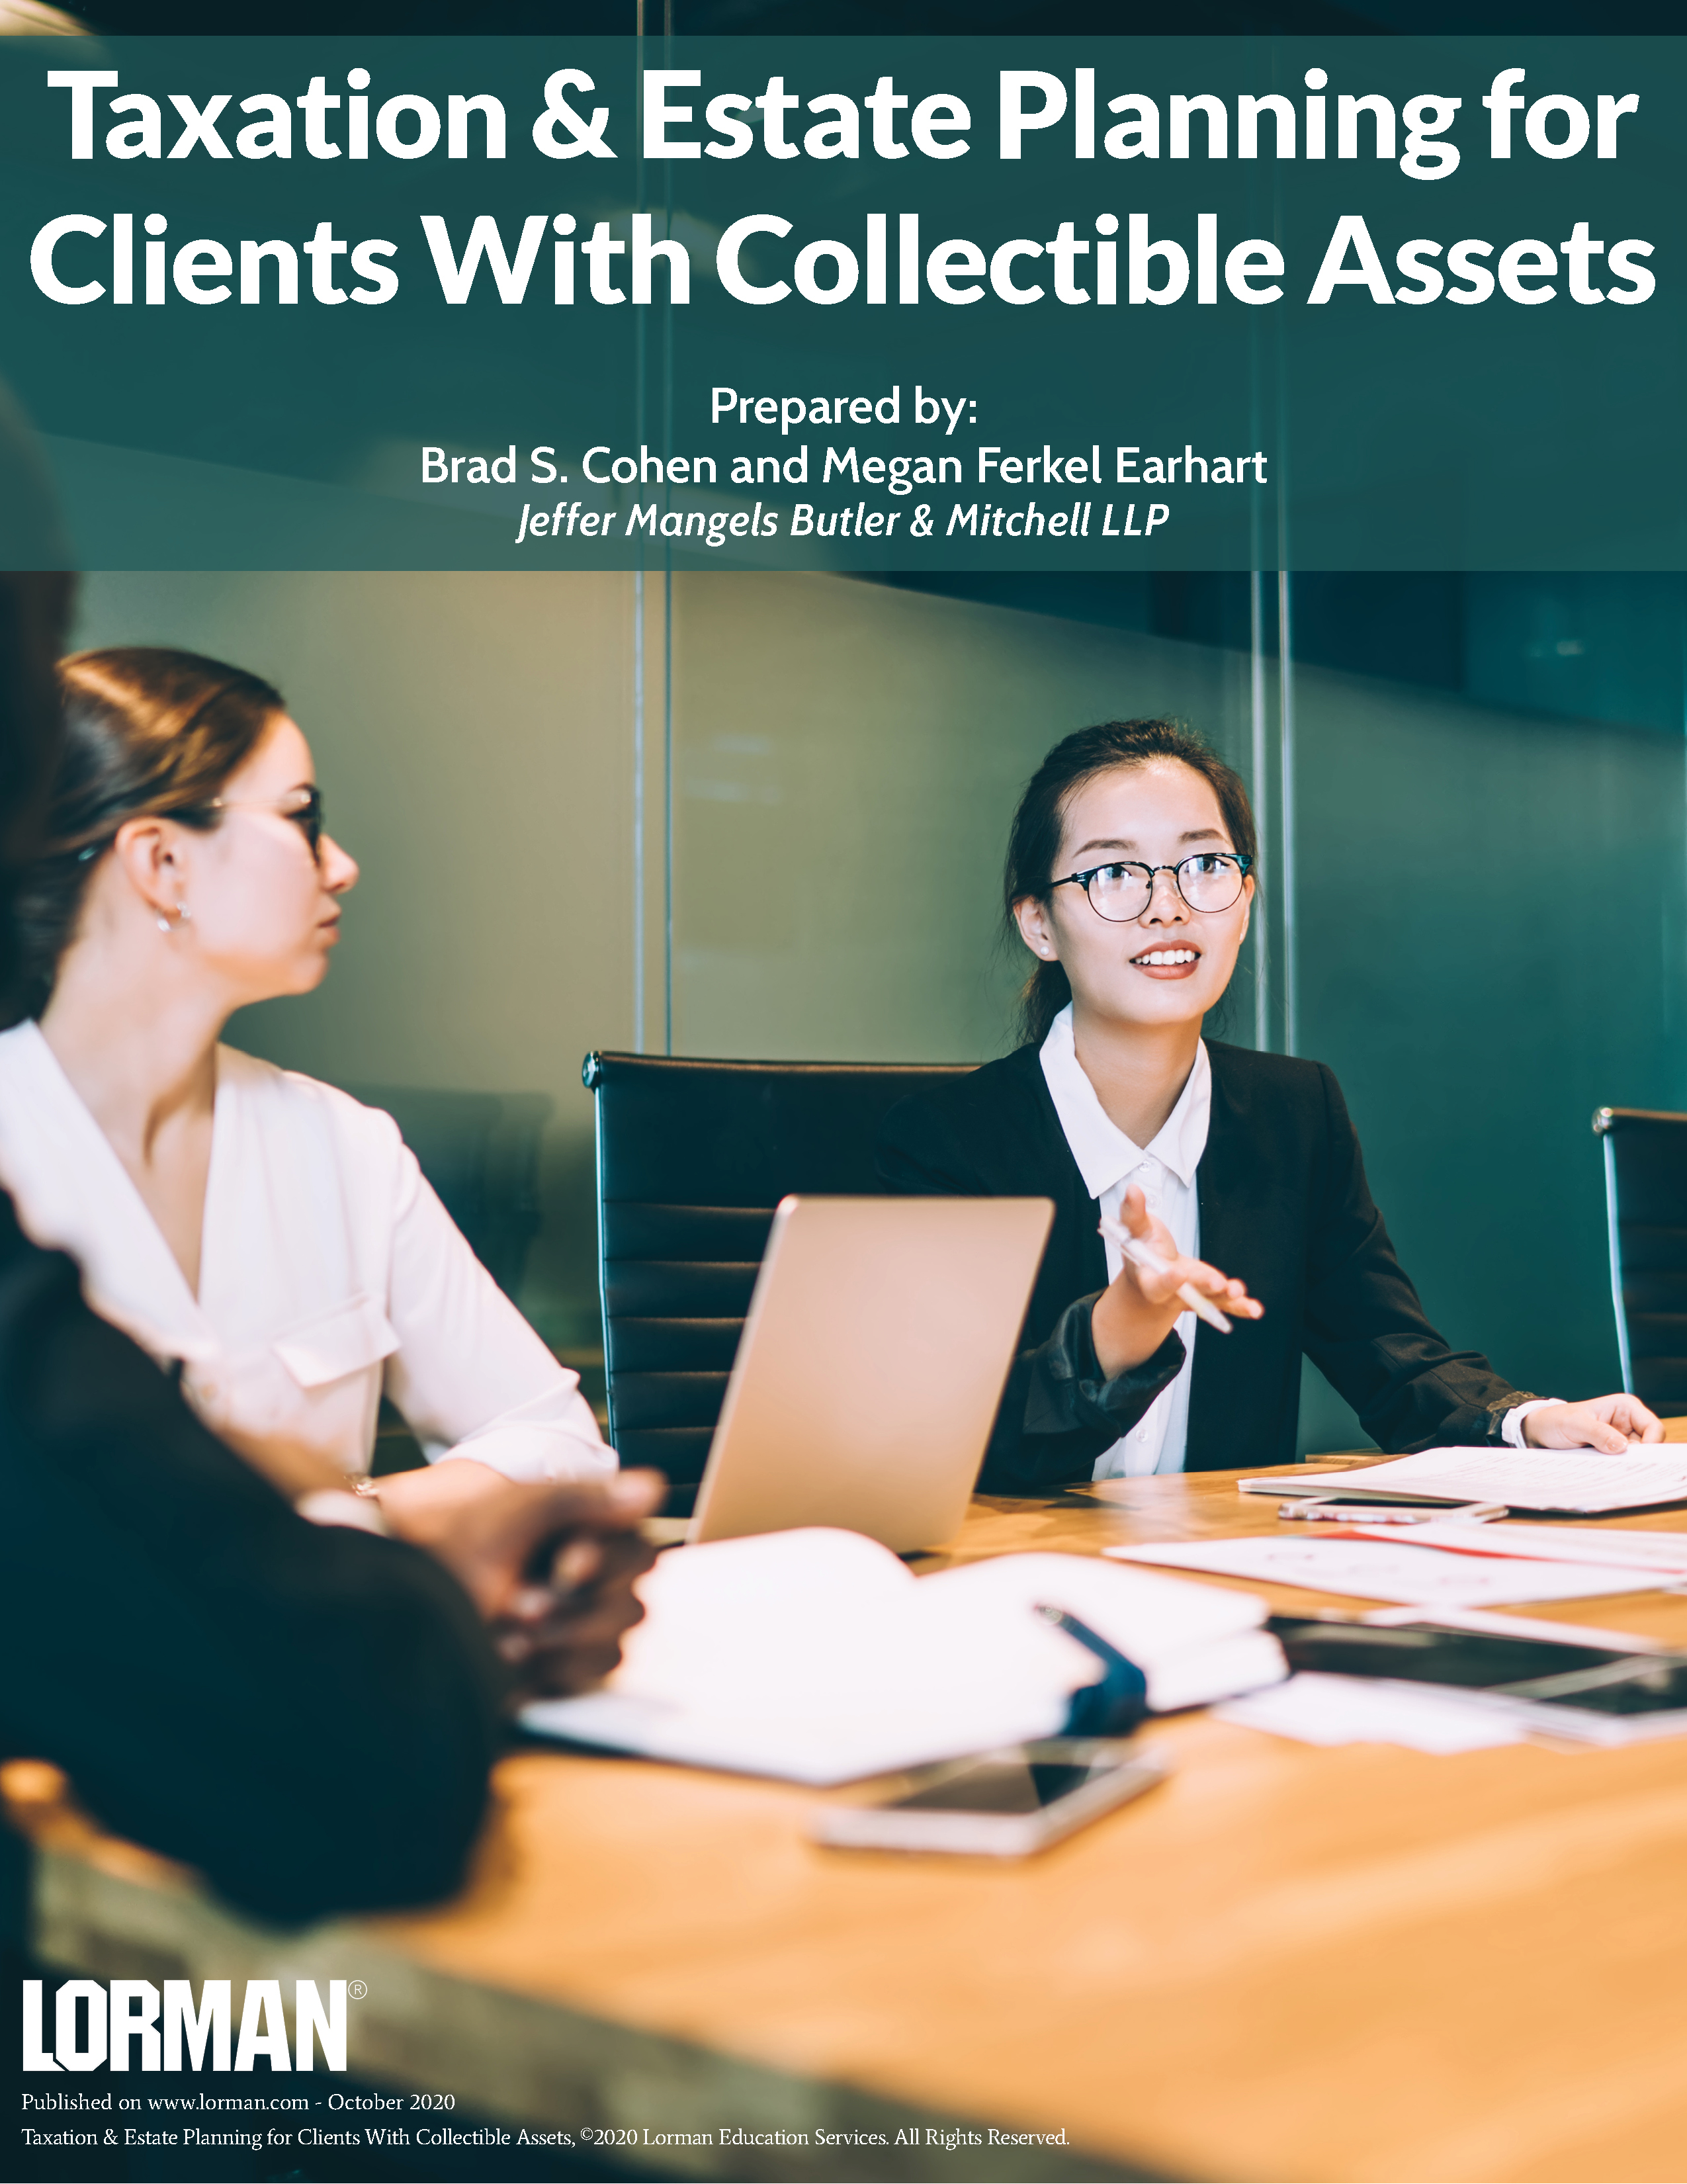 Taxation and Estate Planning for Clients with Collectible Assets